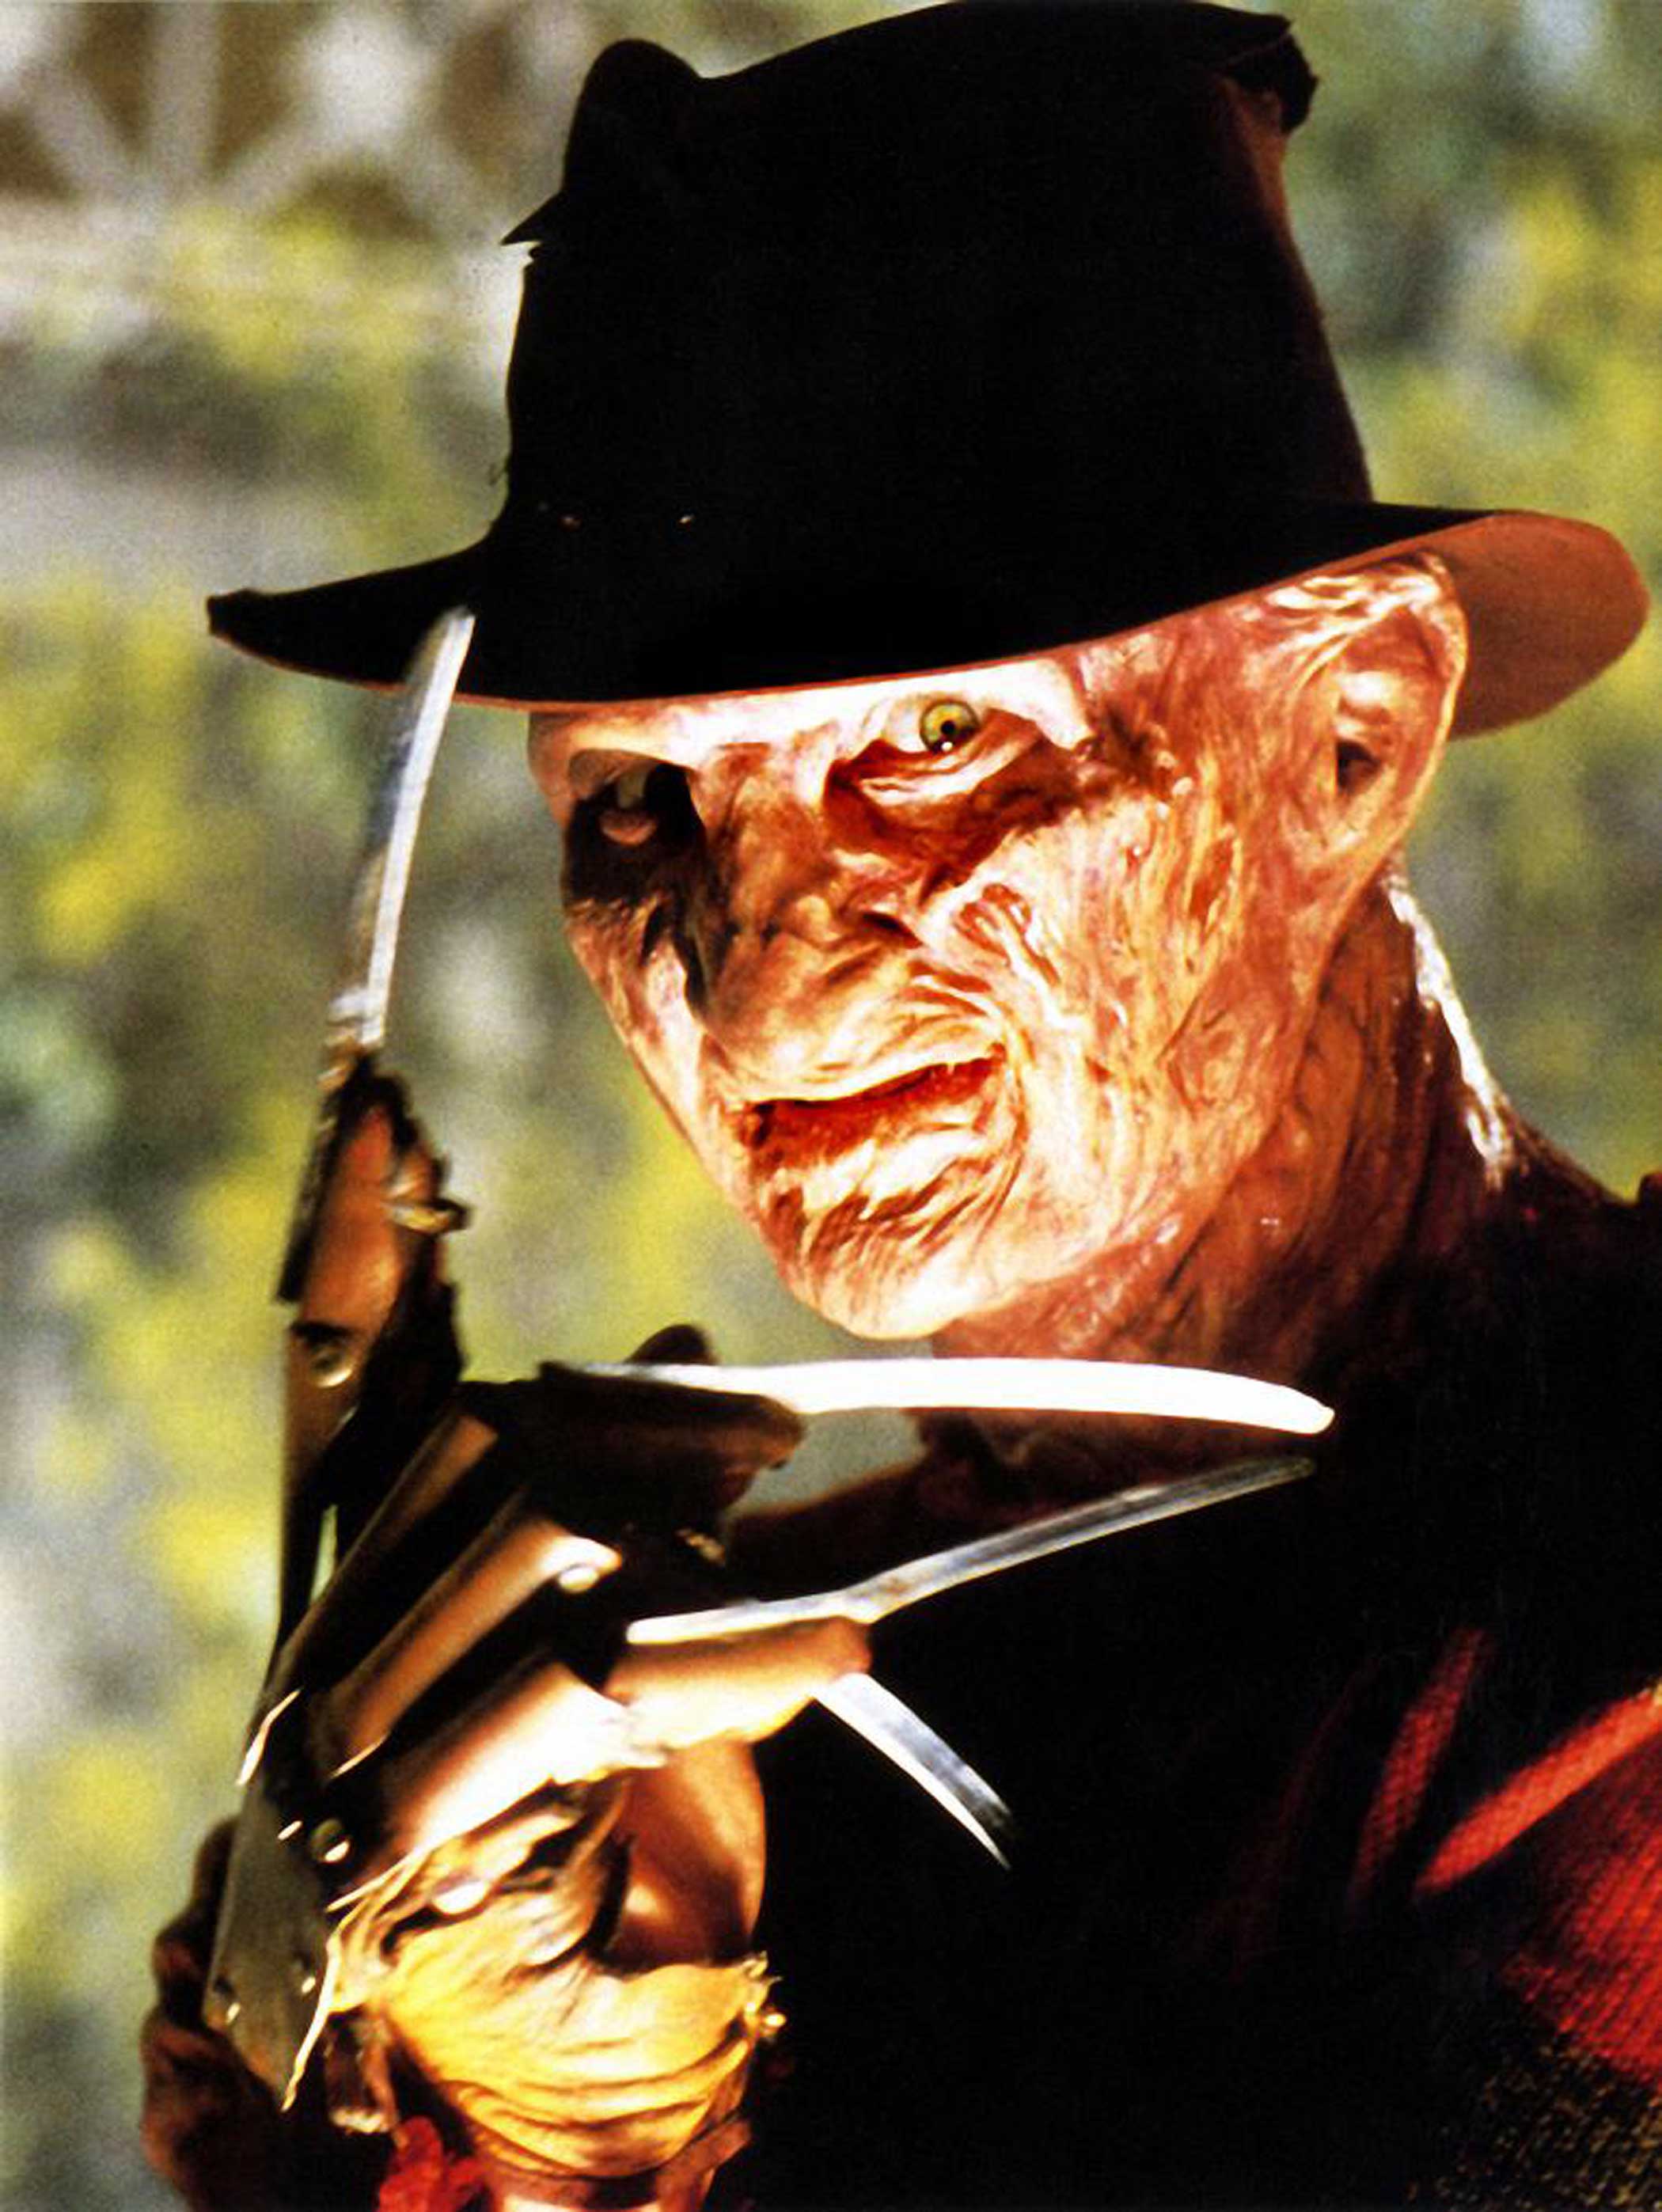 A Nightmare on Elm Street, 1984 The film's premise is influenced by several LA Times articles in the 1970s about Khmer refugees, who fled to the United States from Cambodia. Some of the refugees had disturbing nightmares, and refused to sleep. Some died in their sleep afterwards, being possibly caused by sudden unexpected death syndrome.